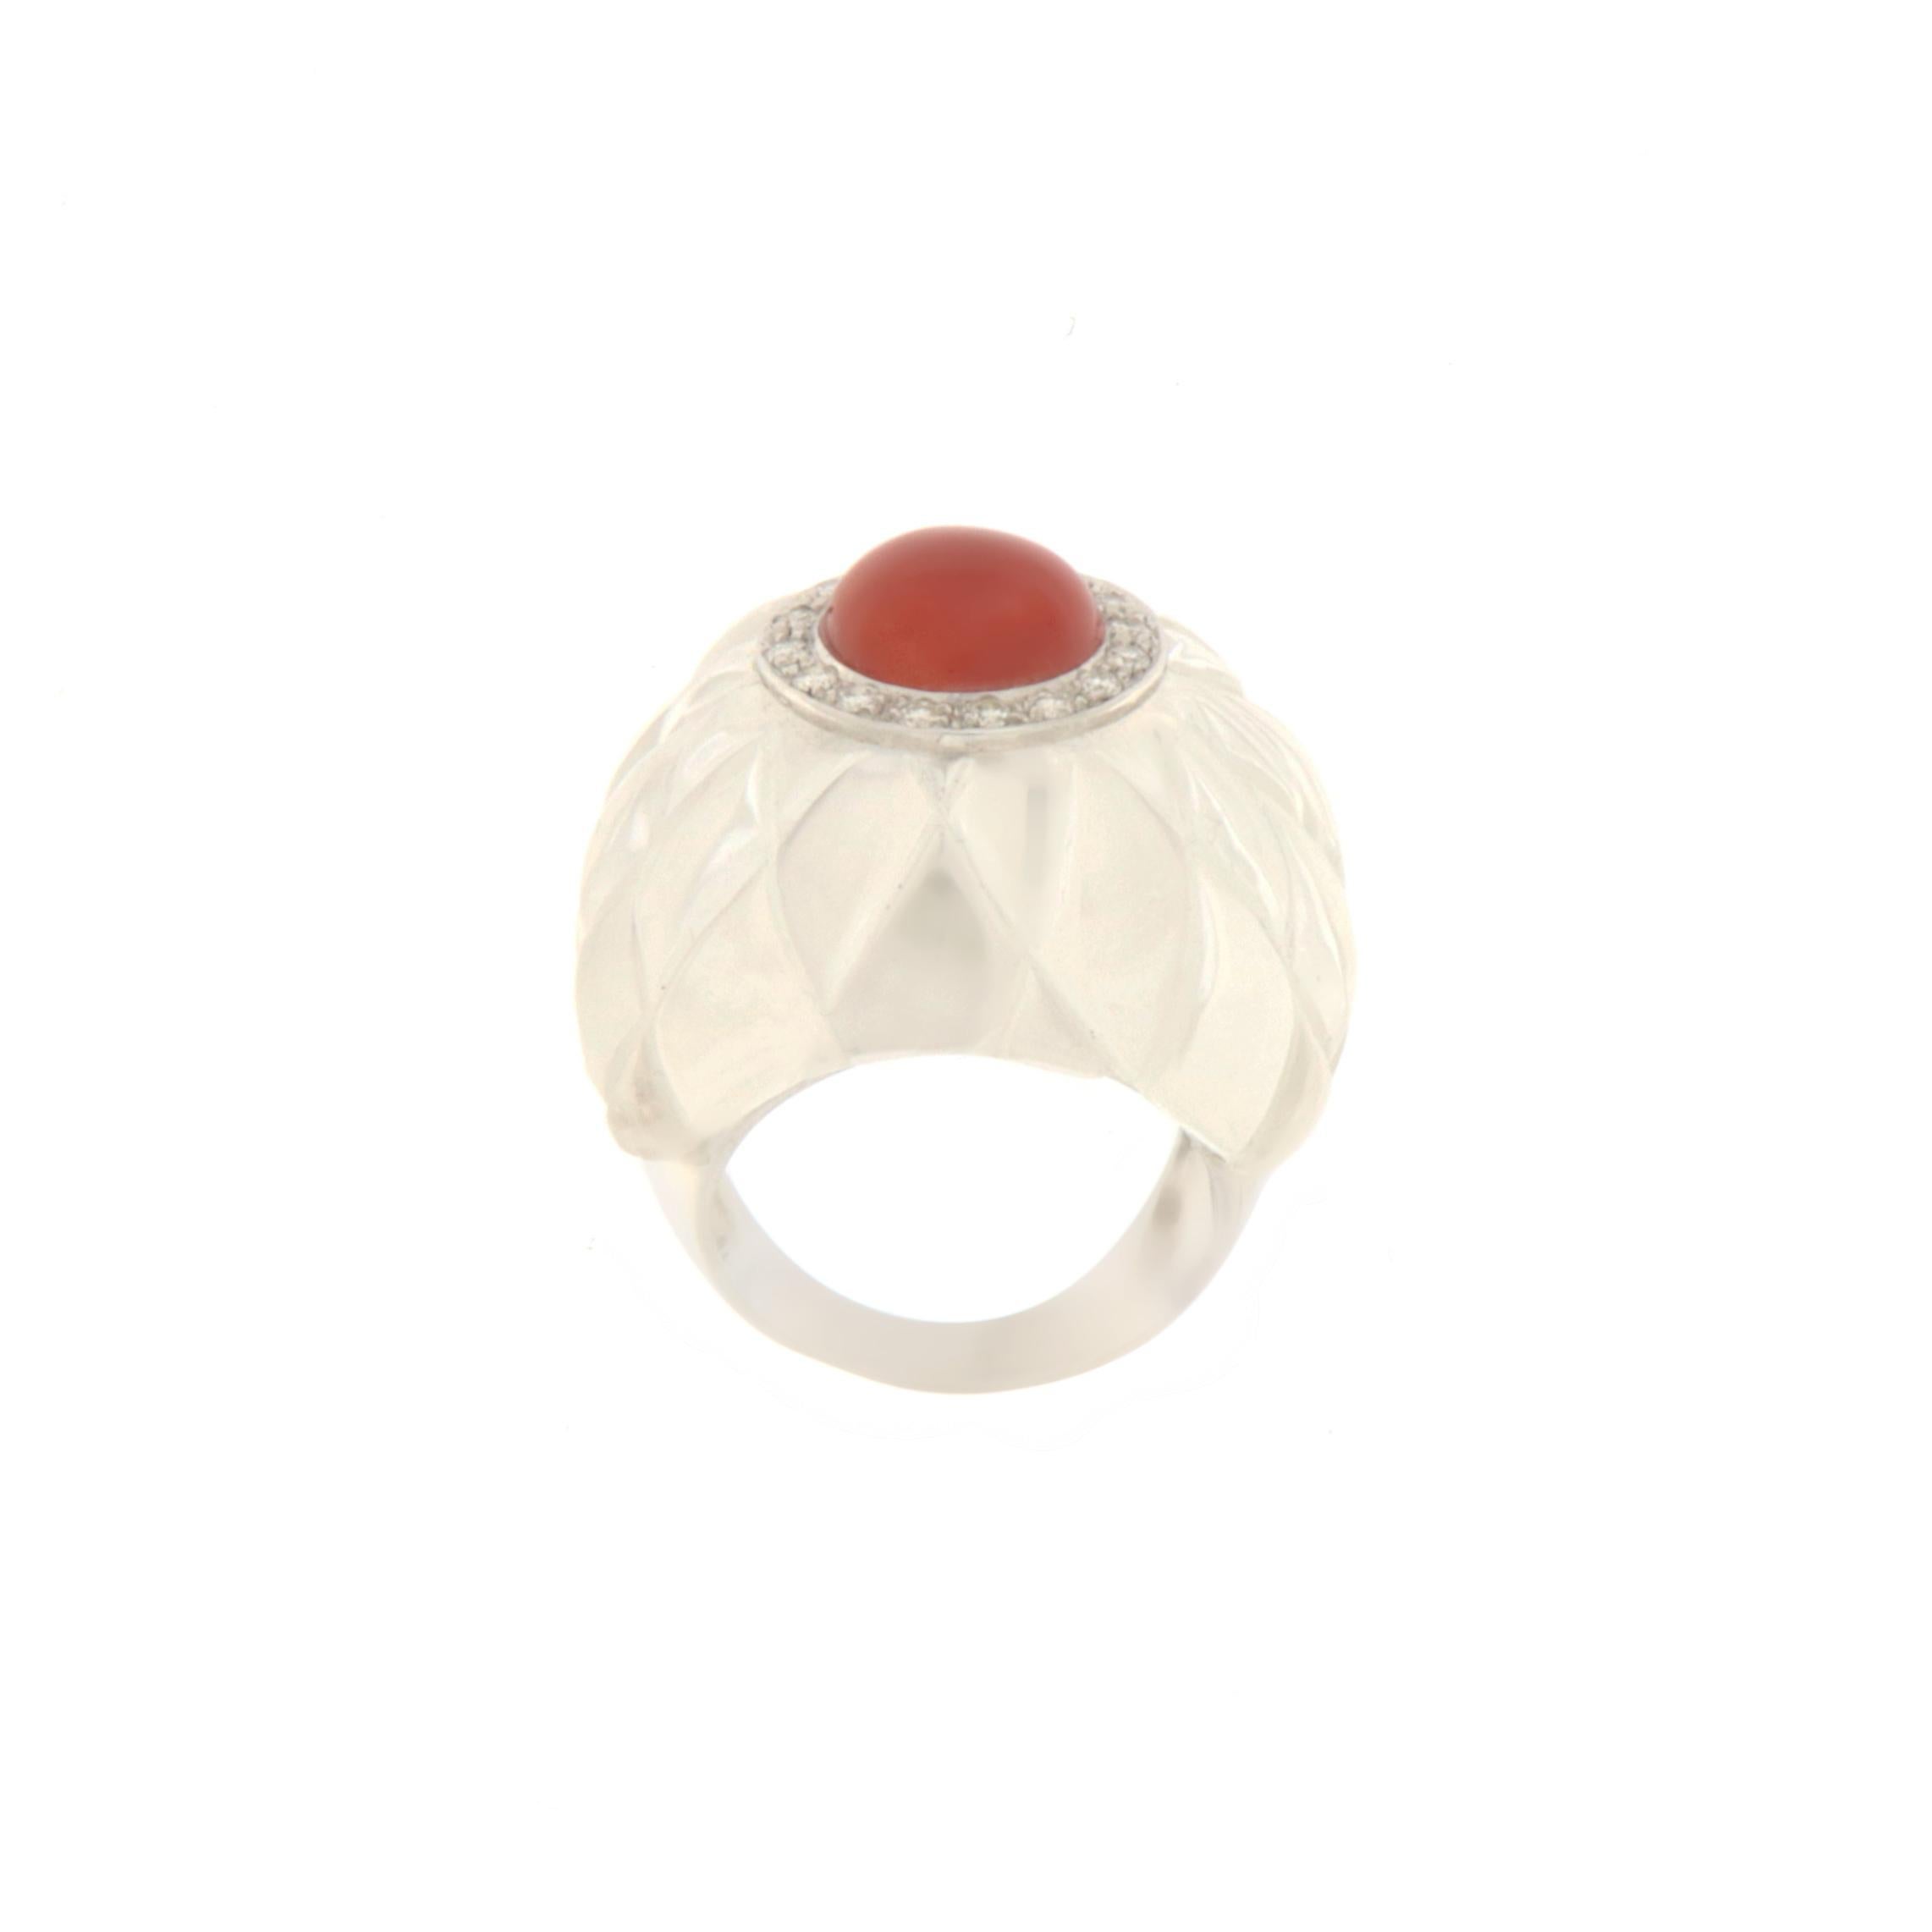 Spectacular ring made in 18k white gold by the hands of expert Neapolitan craftsmen, mounted with diamonds that surround the natural coral in the highest part of the ring and an engraved rock crystal that shapes the ring. For lovers of the genre, it